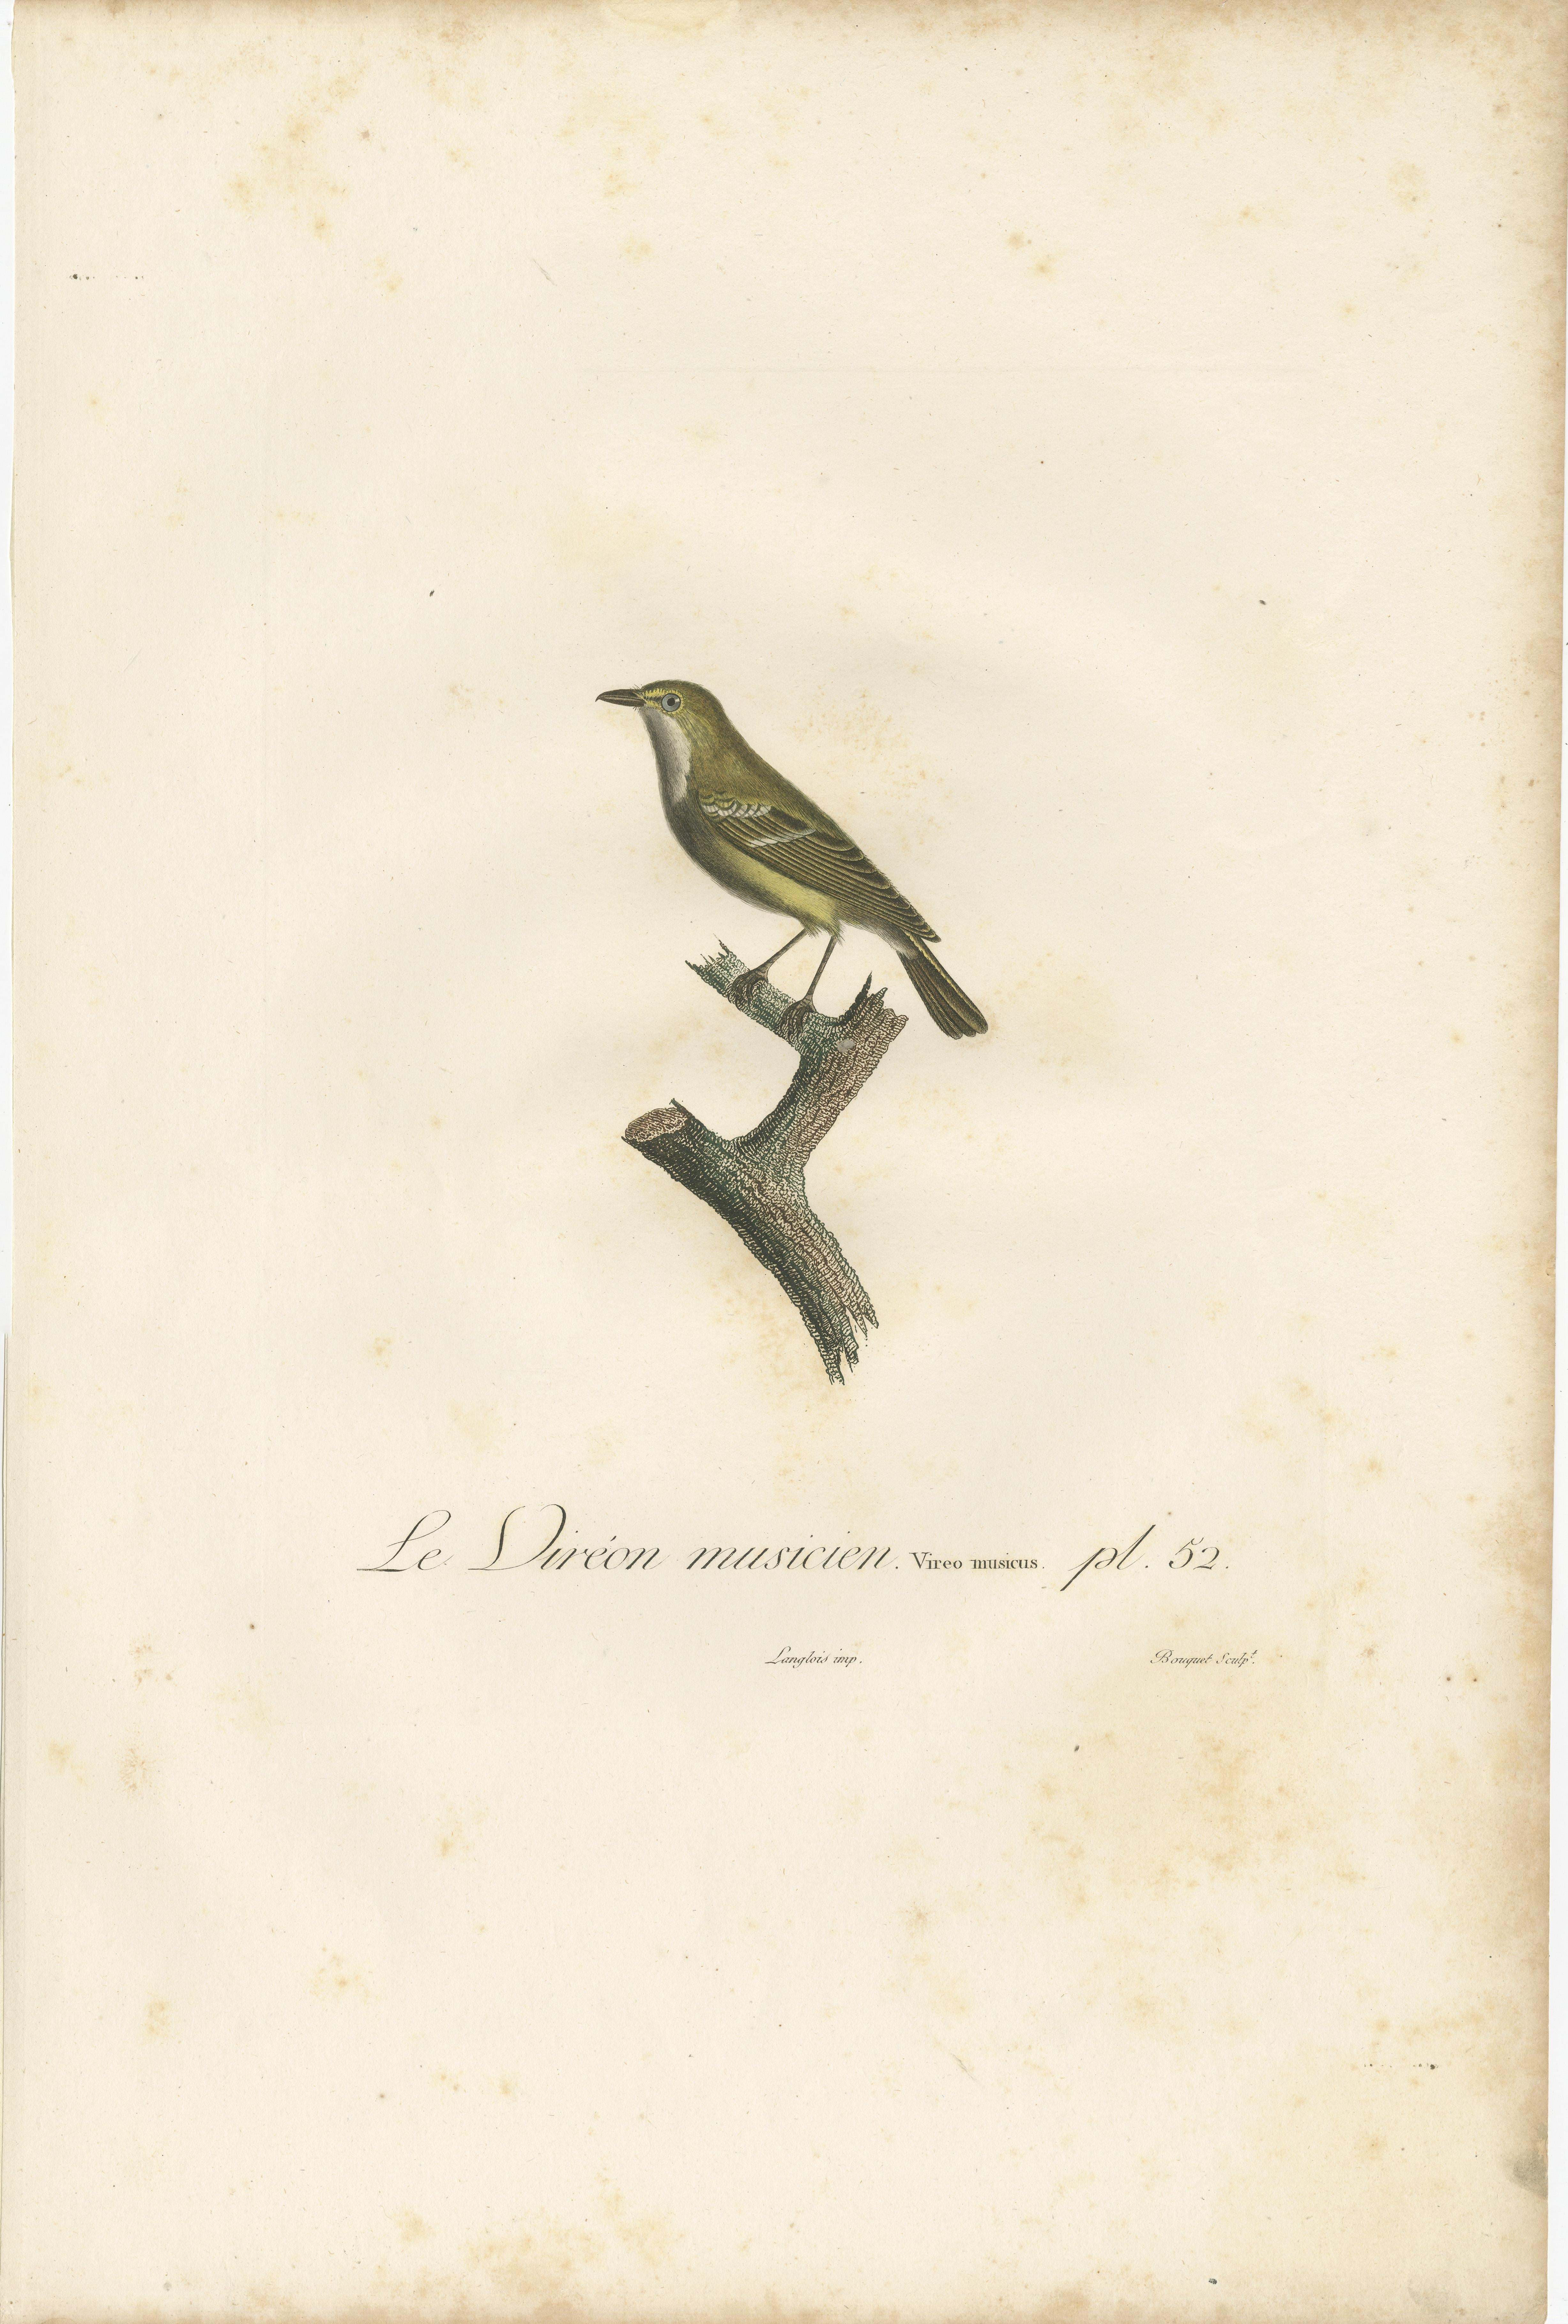 This image is a handcolored antique print, titled 'Le Viréon musicien', representing a vireo bird species. The bird is illustrated perched on a tree branch, portrayed in profile facing the right. The vireo is elegantly colored, primarily in shades